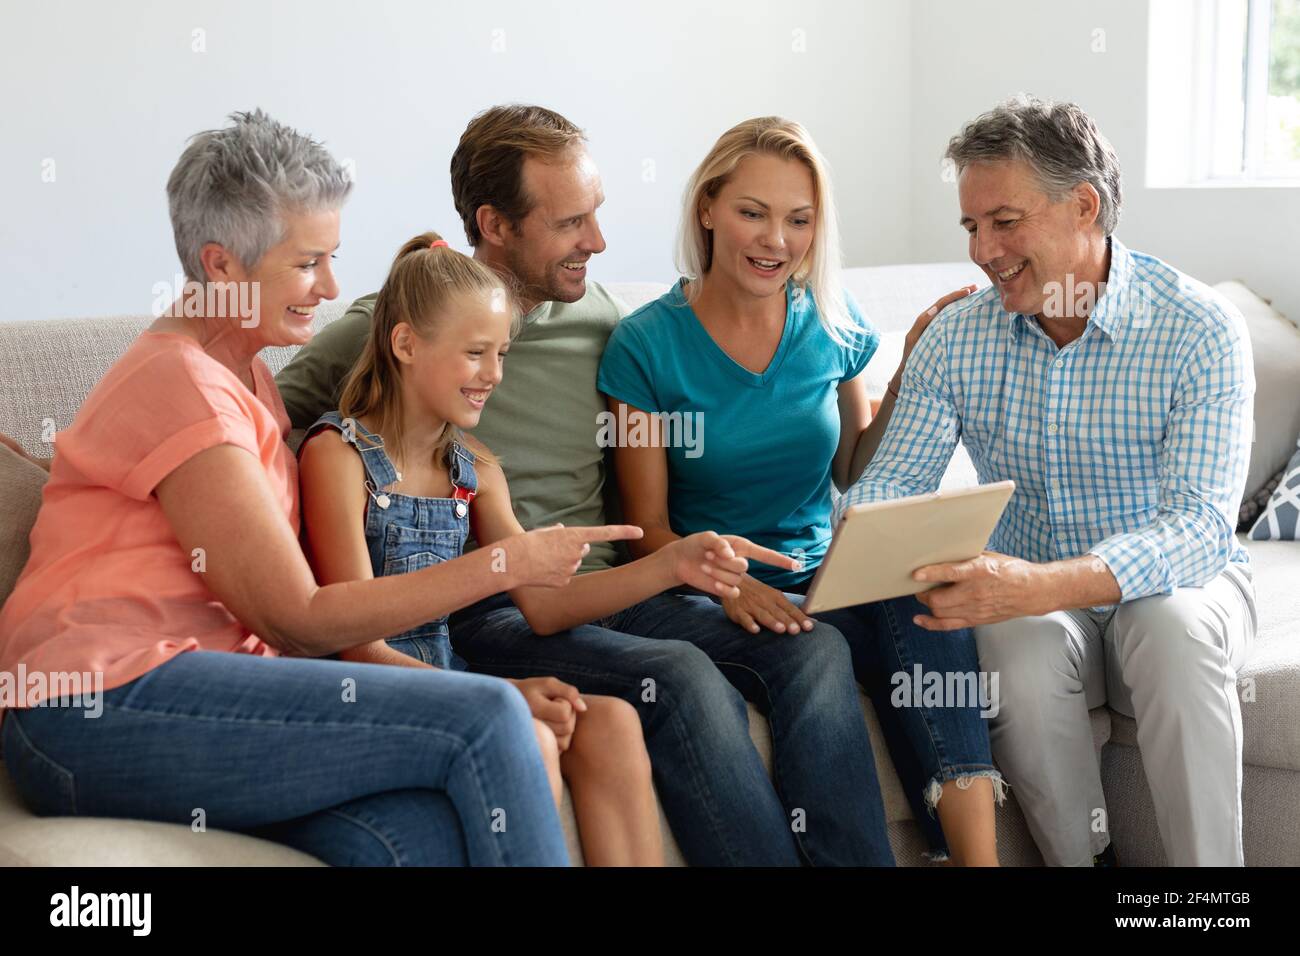 Smiling caucasian grandparents on couch with granddaughter and her parents looking at tablet Stock Photo